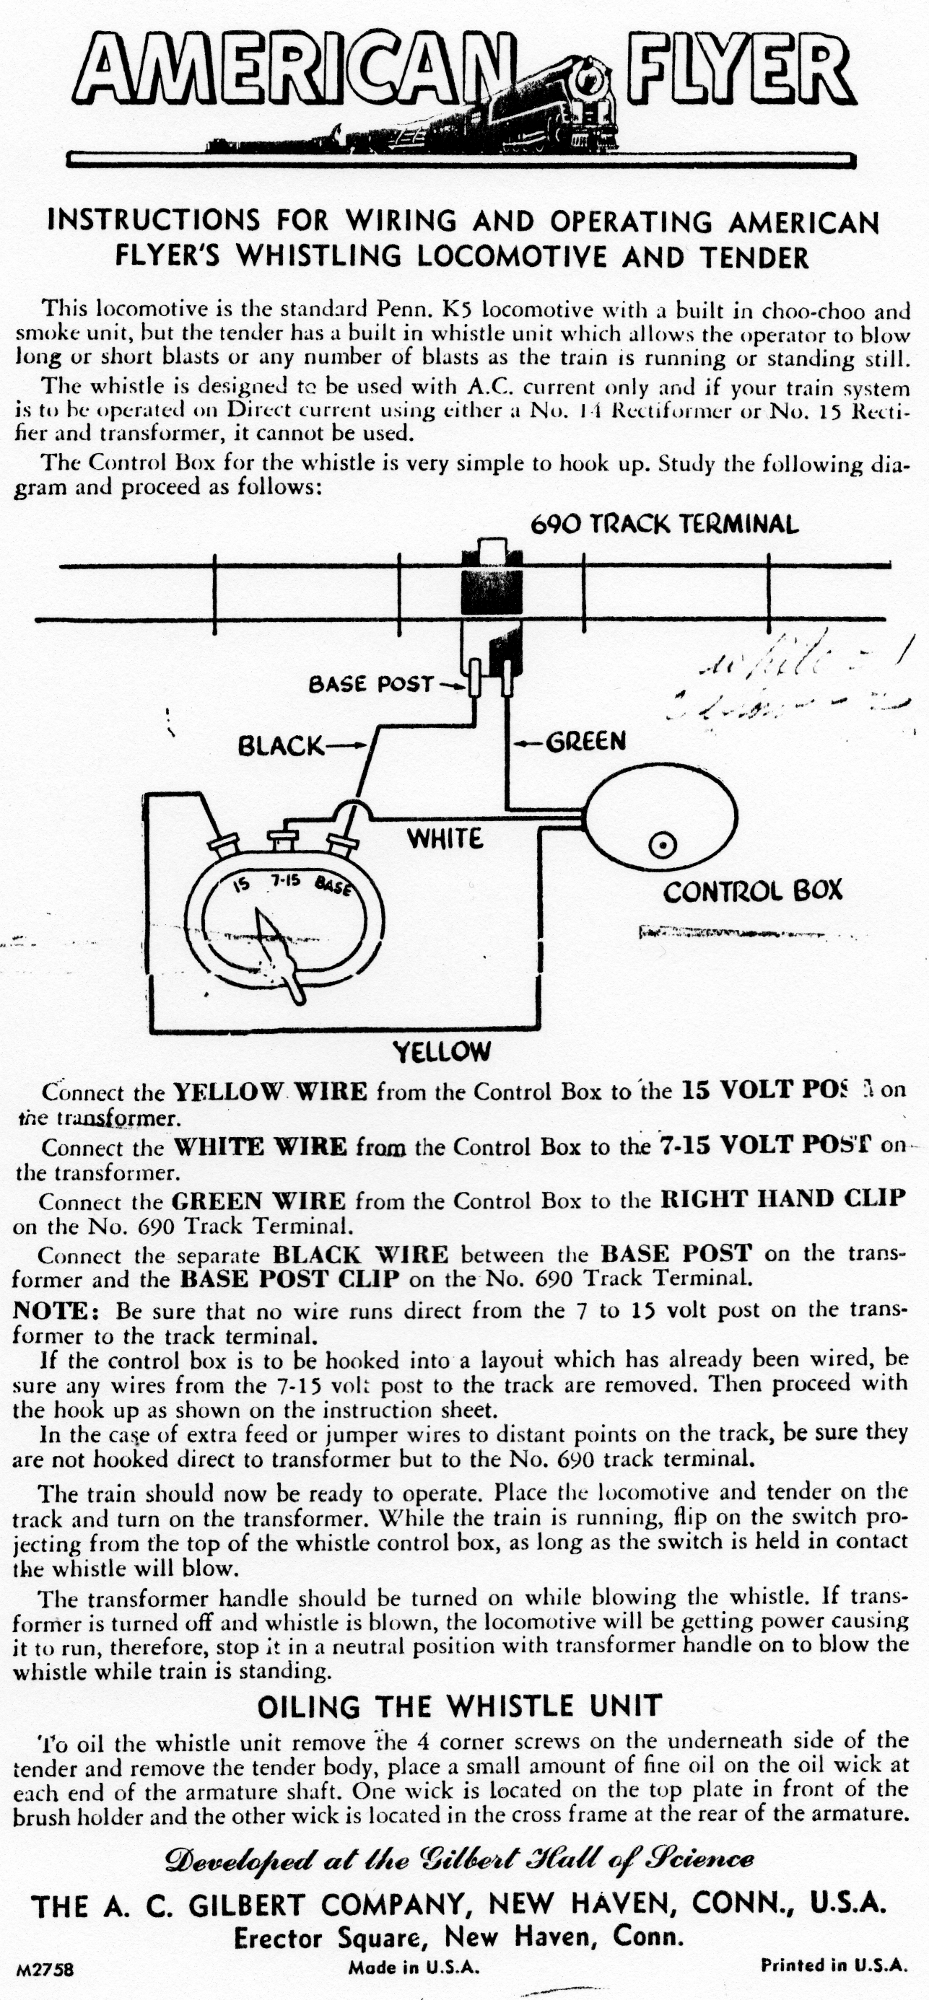 Instructions for Wiring and Operating American Flyer's Whistling Locomotive & Tender